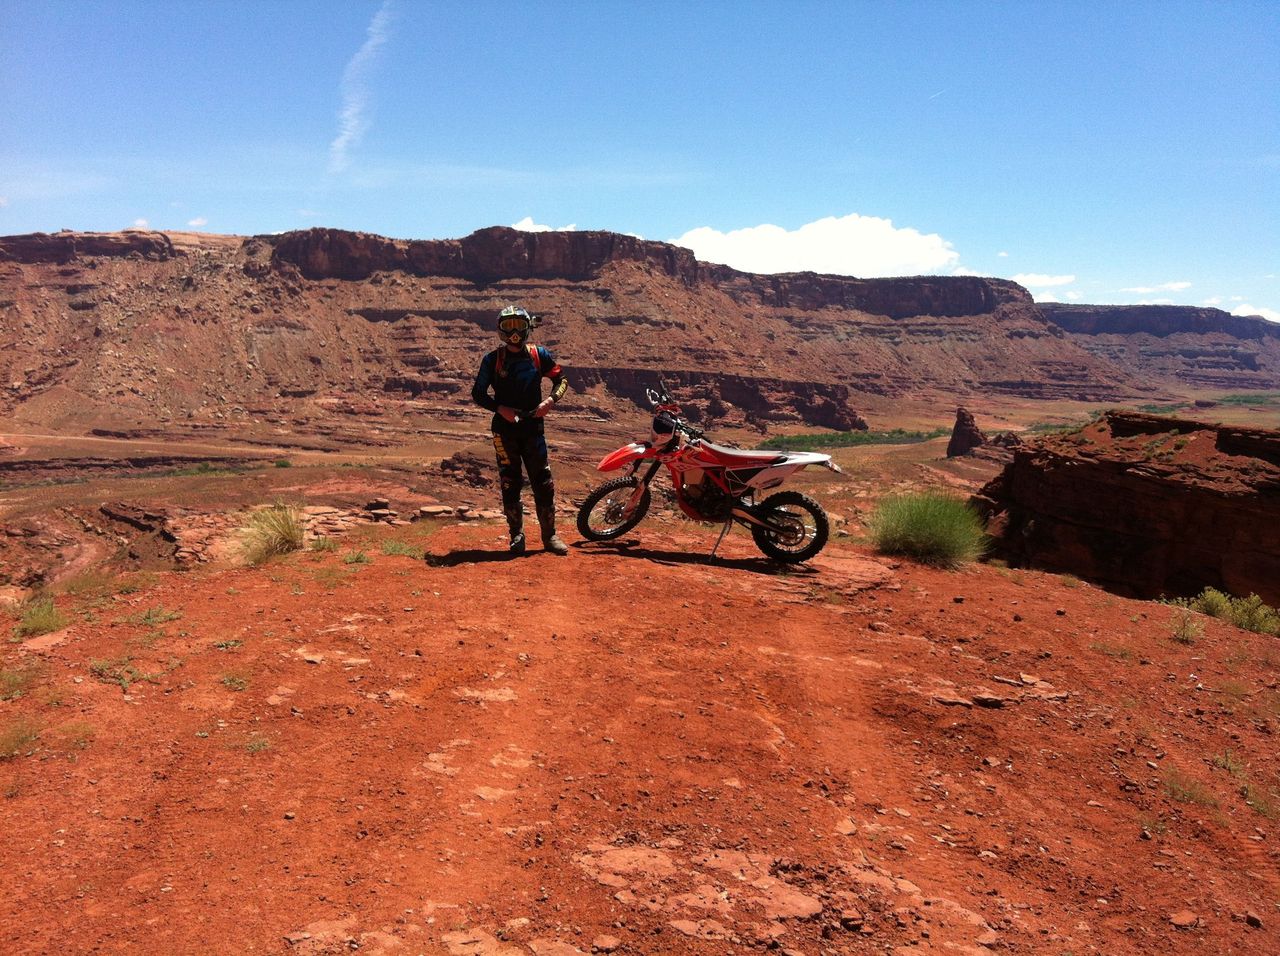 Nick at the edge in Moab